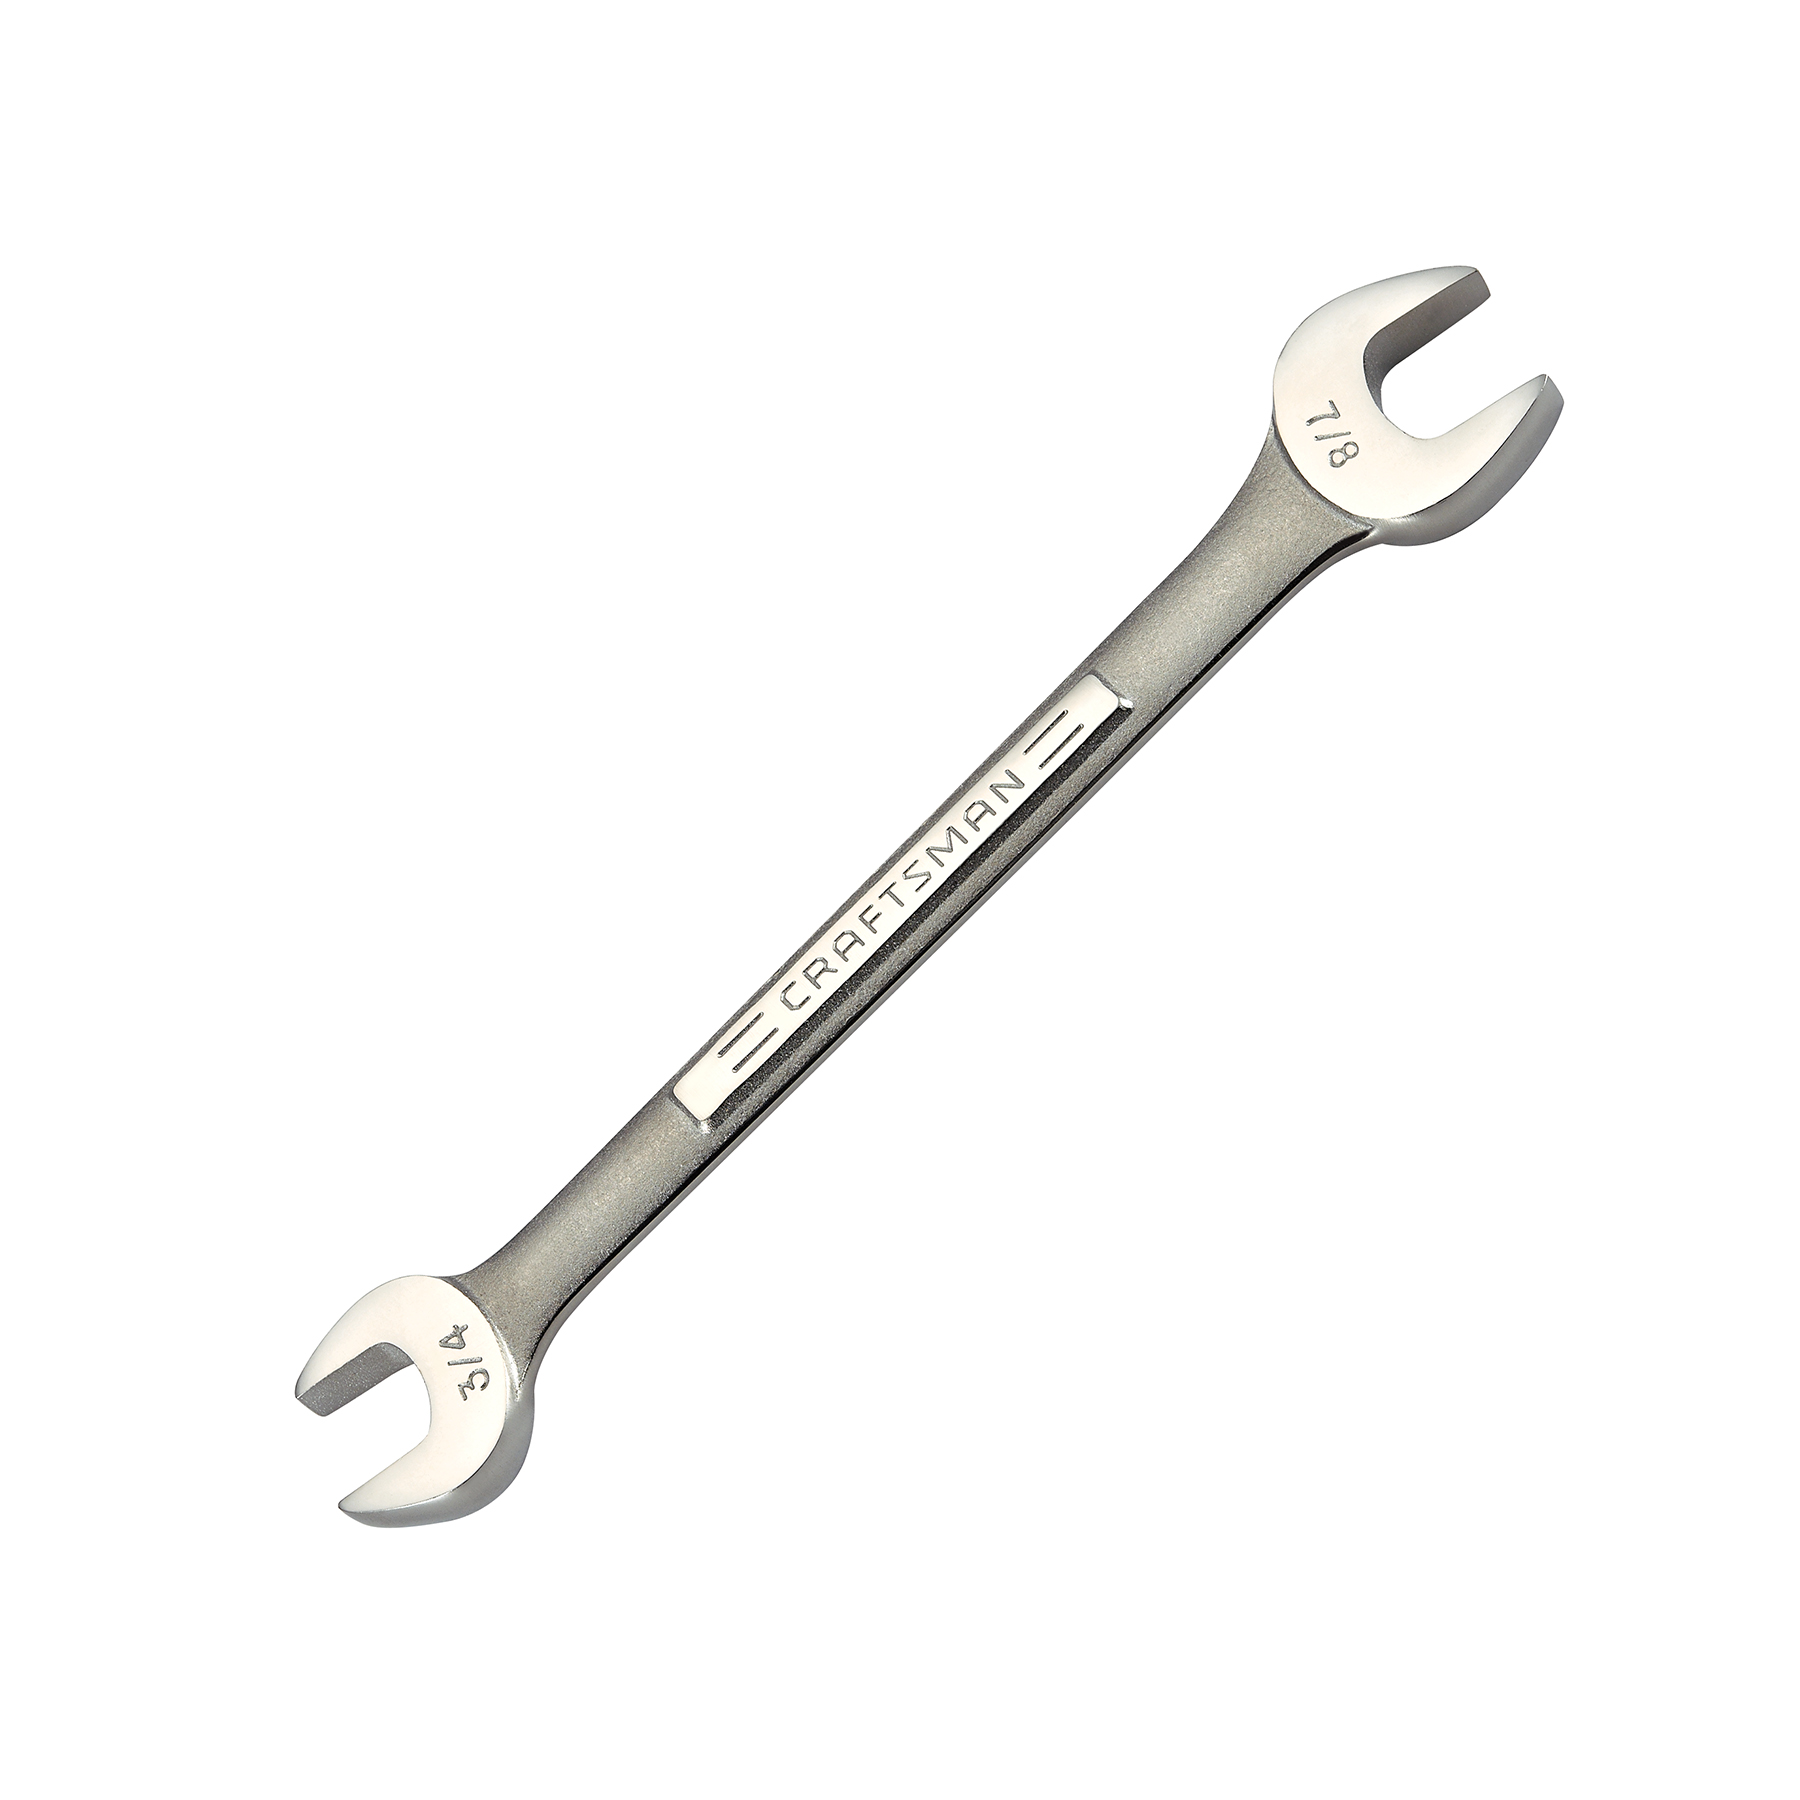 Craftsman 3/4 x 7/8 in. Wrench  Open-End